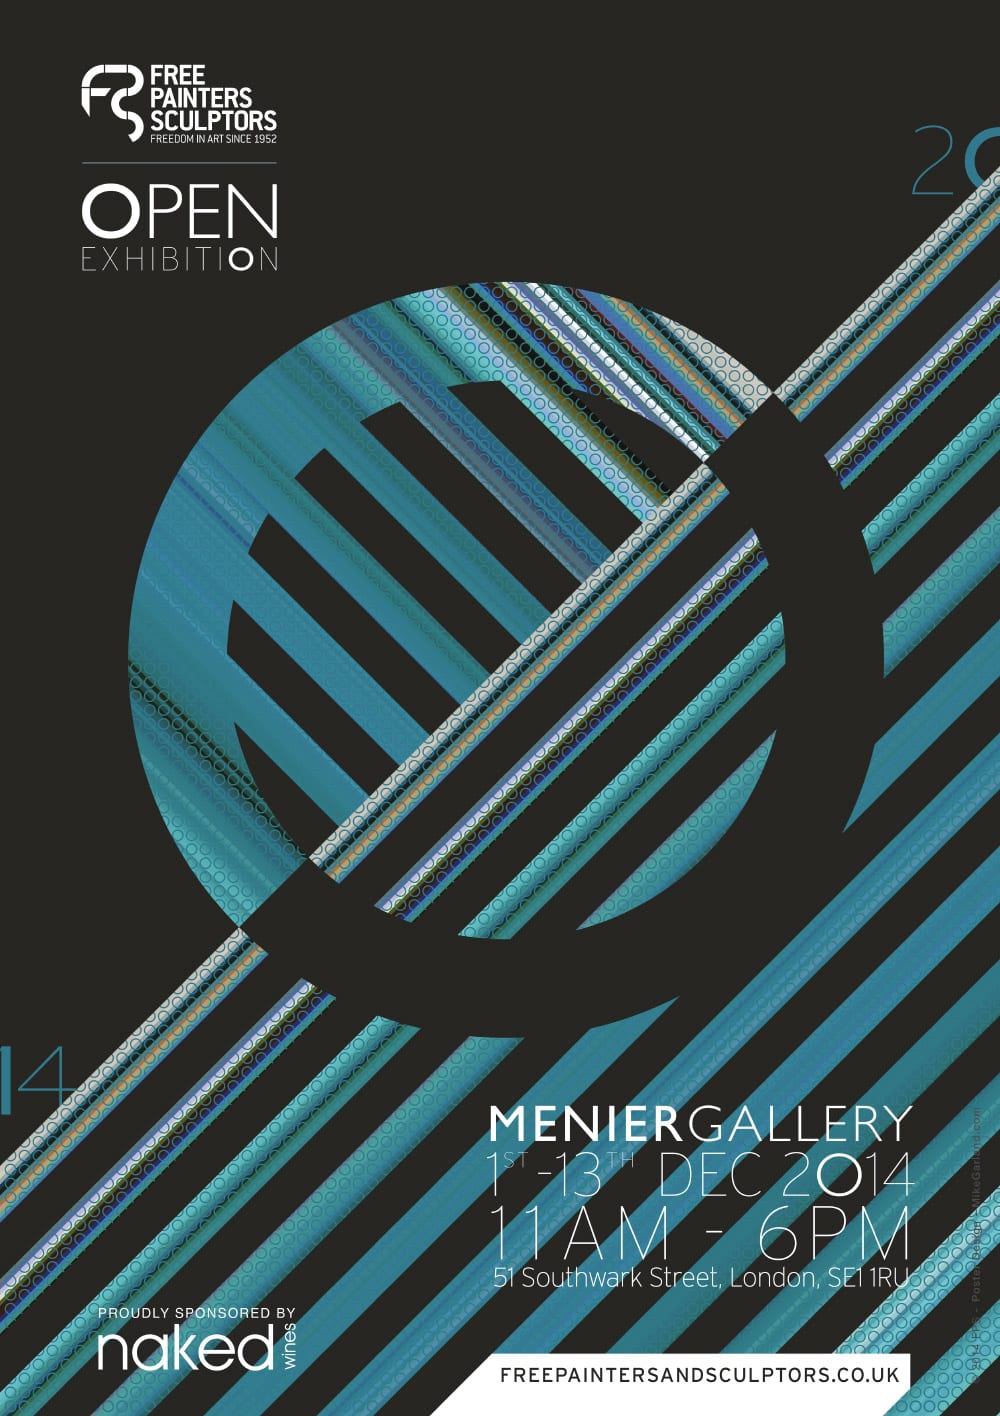 Mike-Garland-FPS-Menier-Gallery-Open-Exhibition-Poster-2014